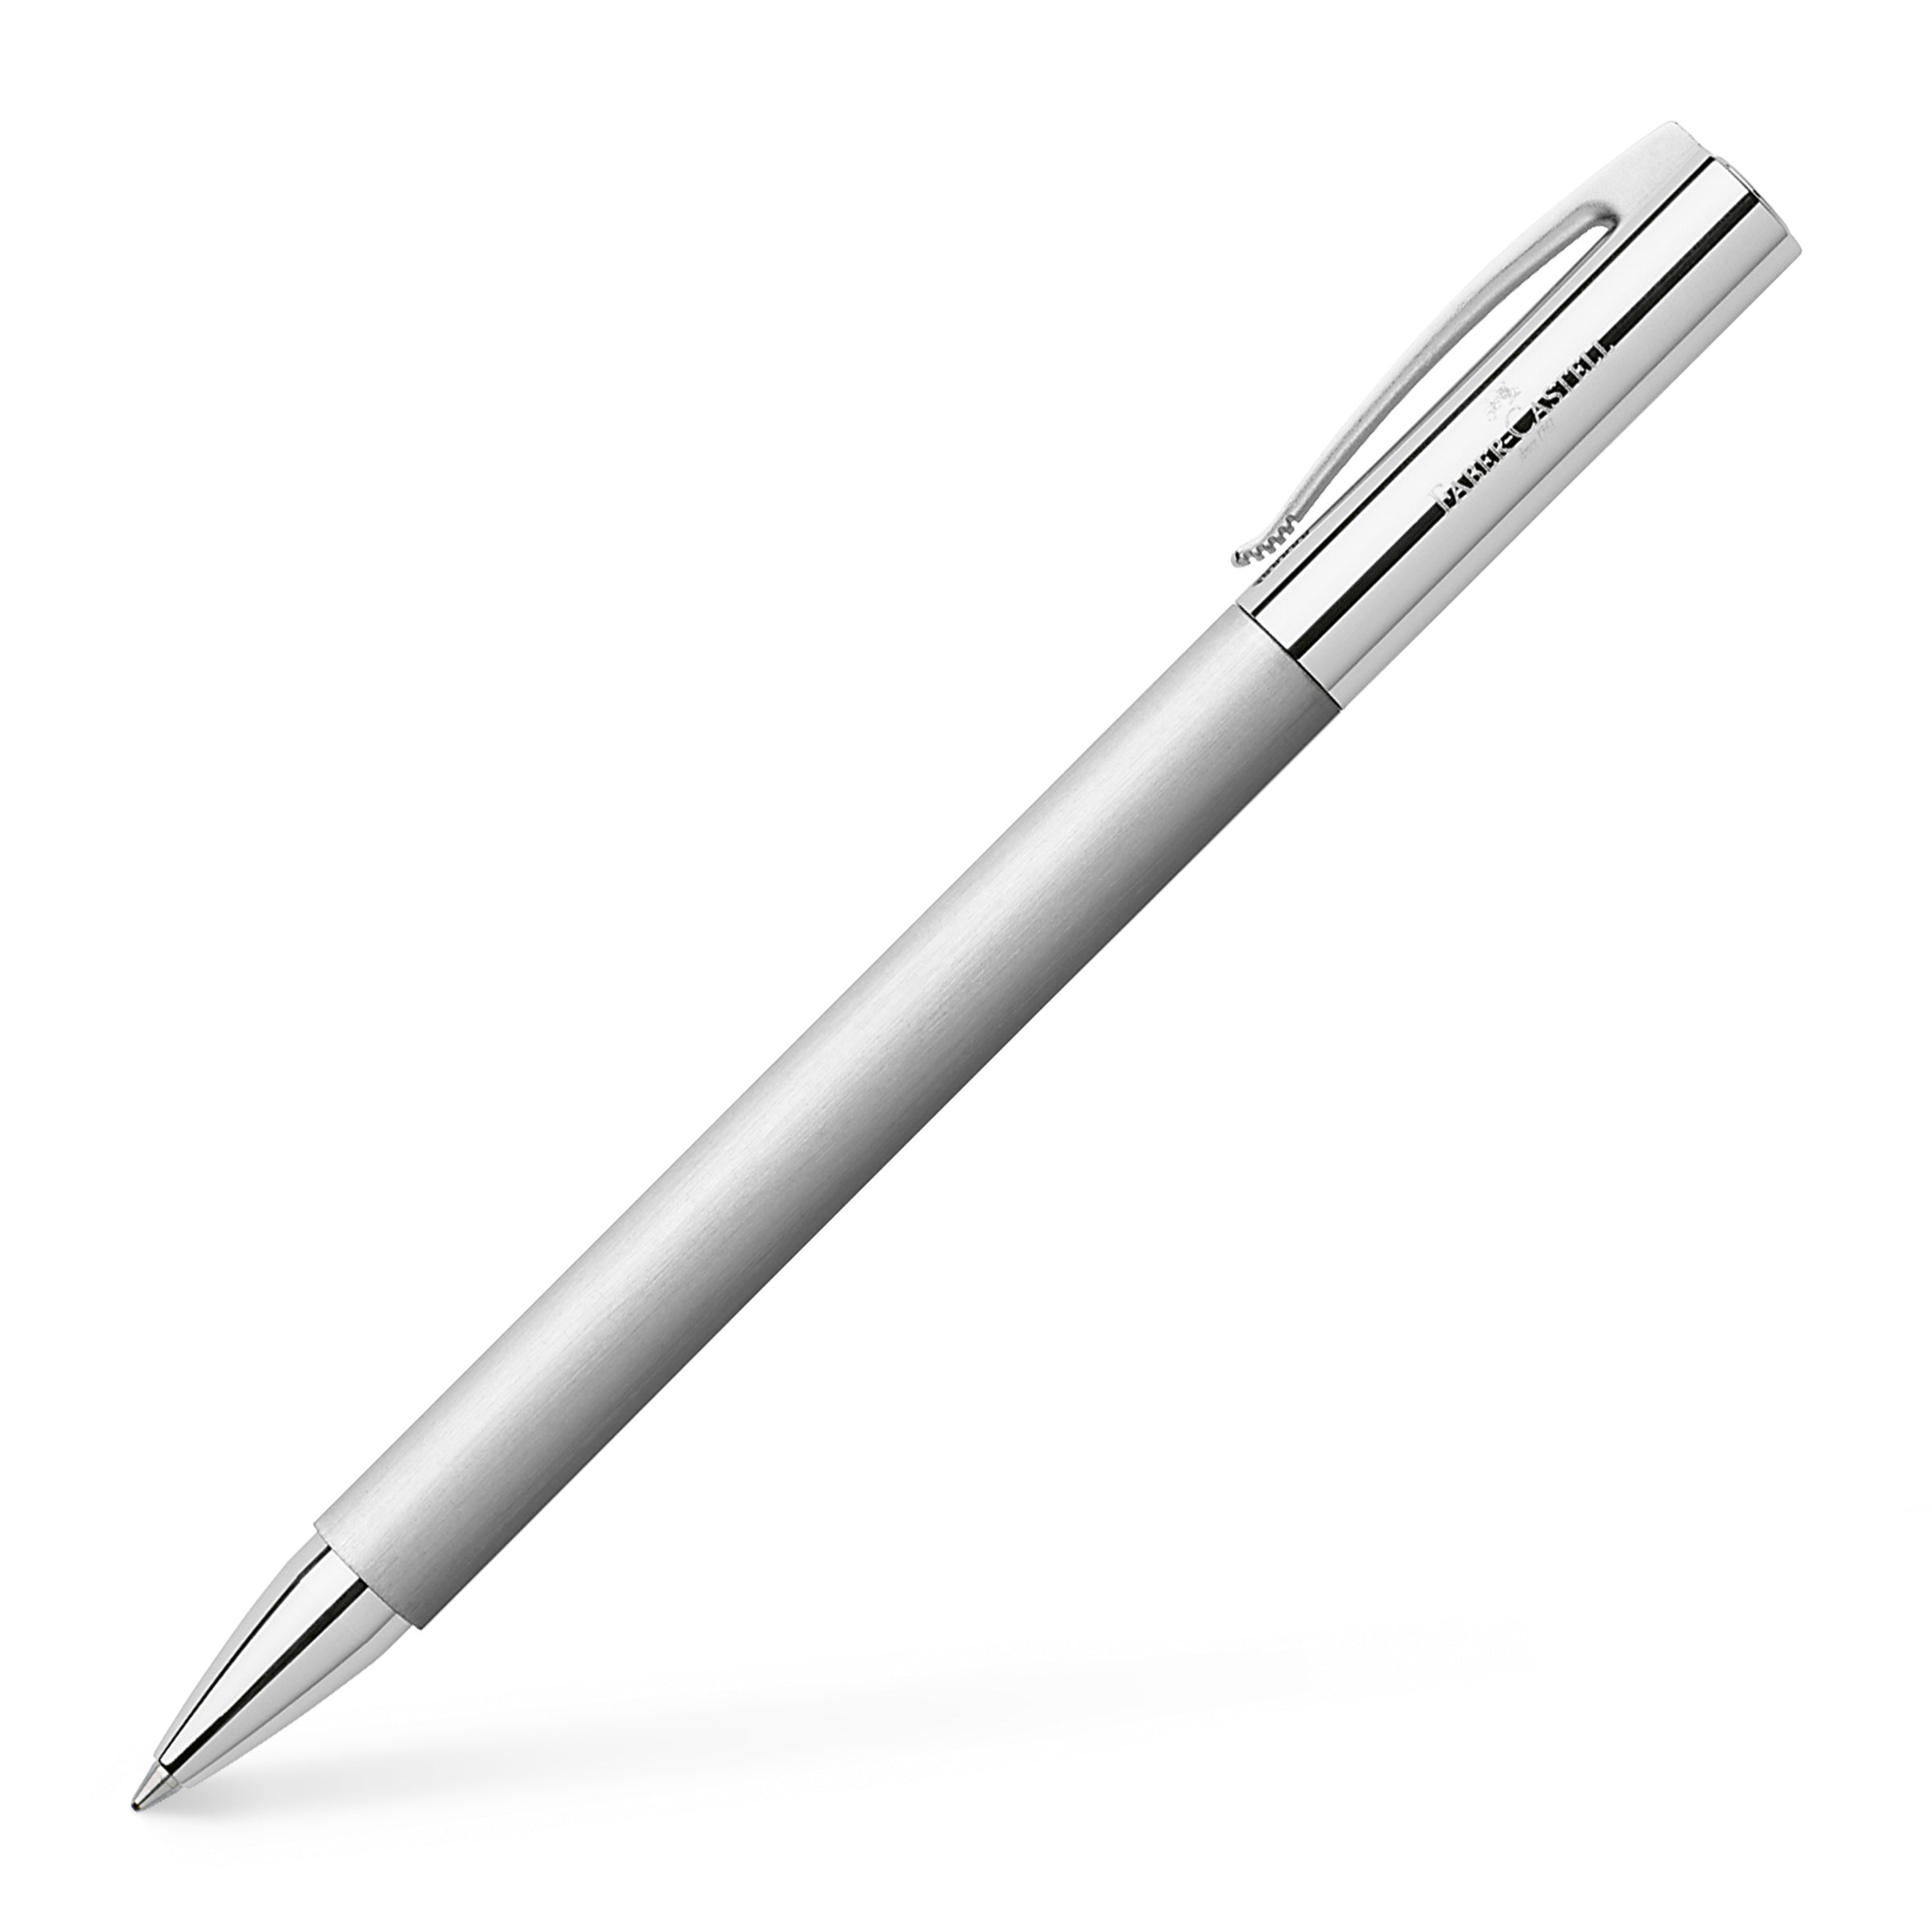 Fabster-call Ambition Rollerball Pen Brushed Steel